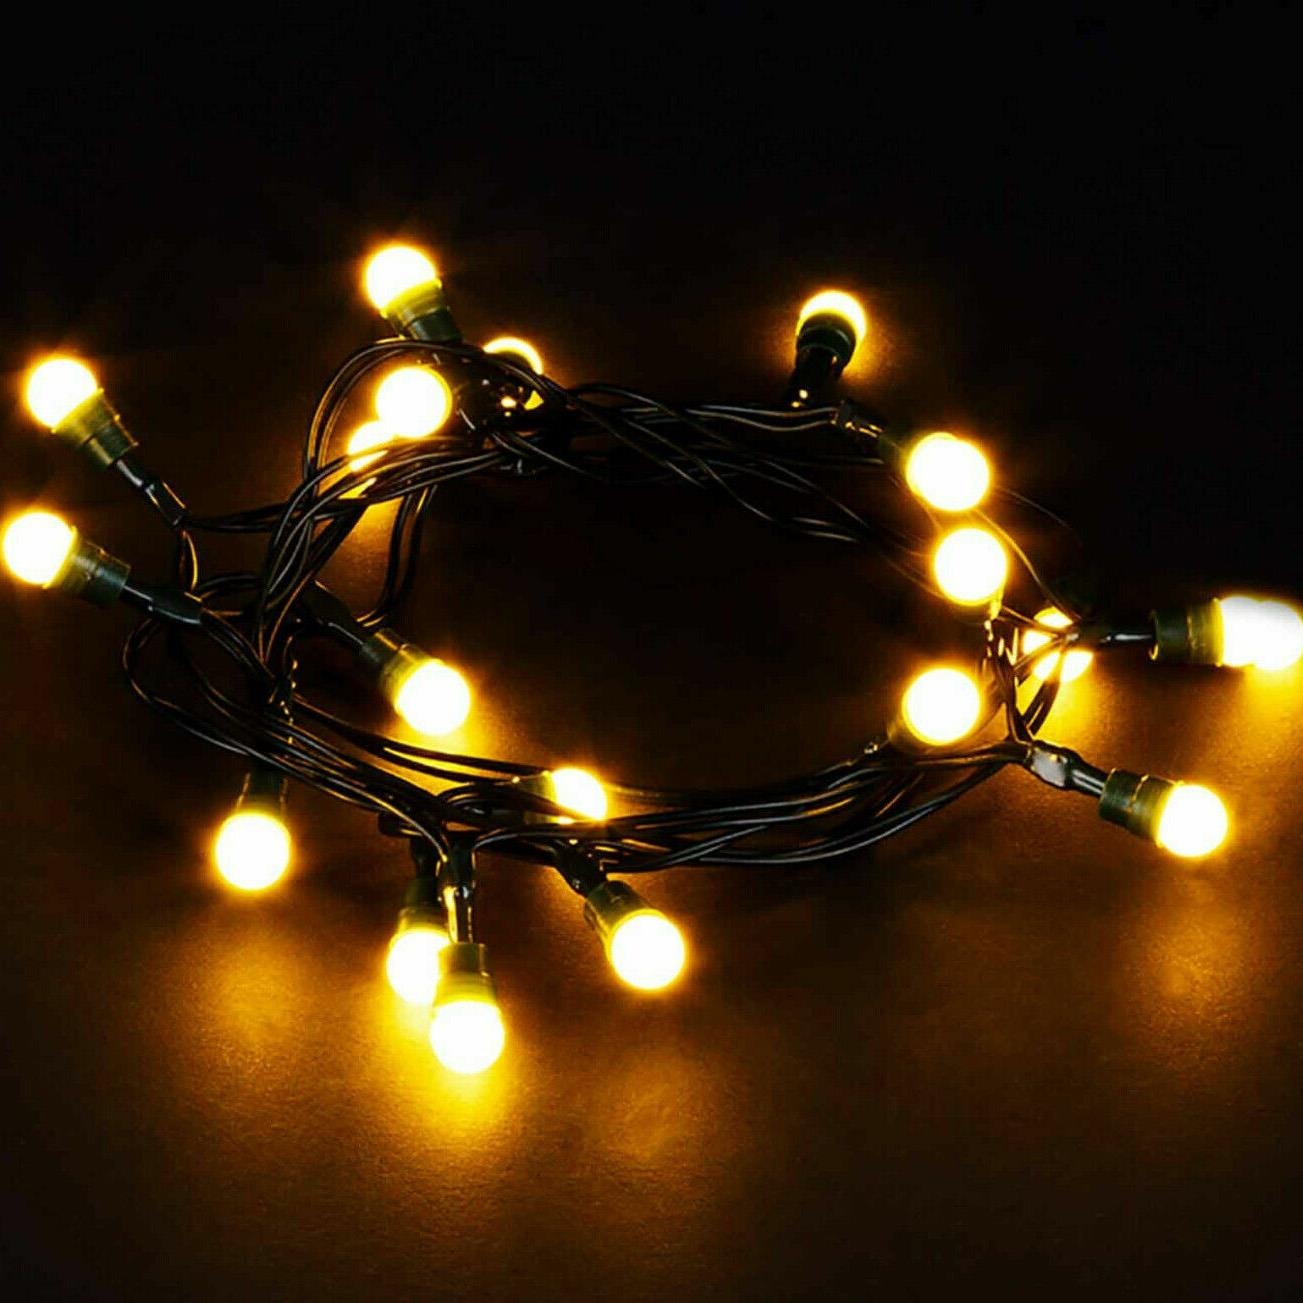 GEEZY Christmas Lights Christmas LED Lights 1000 Berry String Warm White